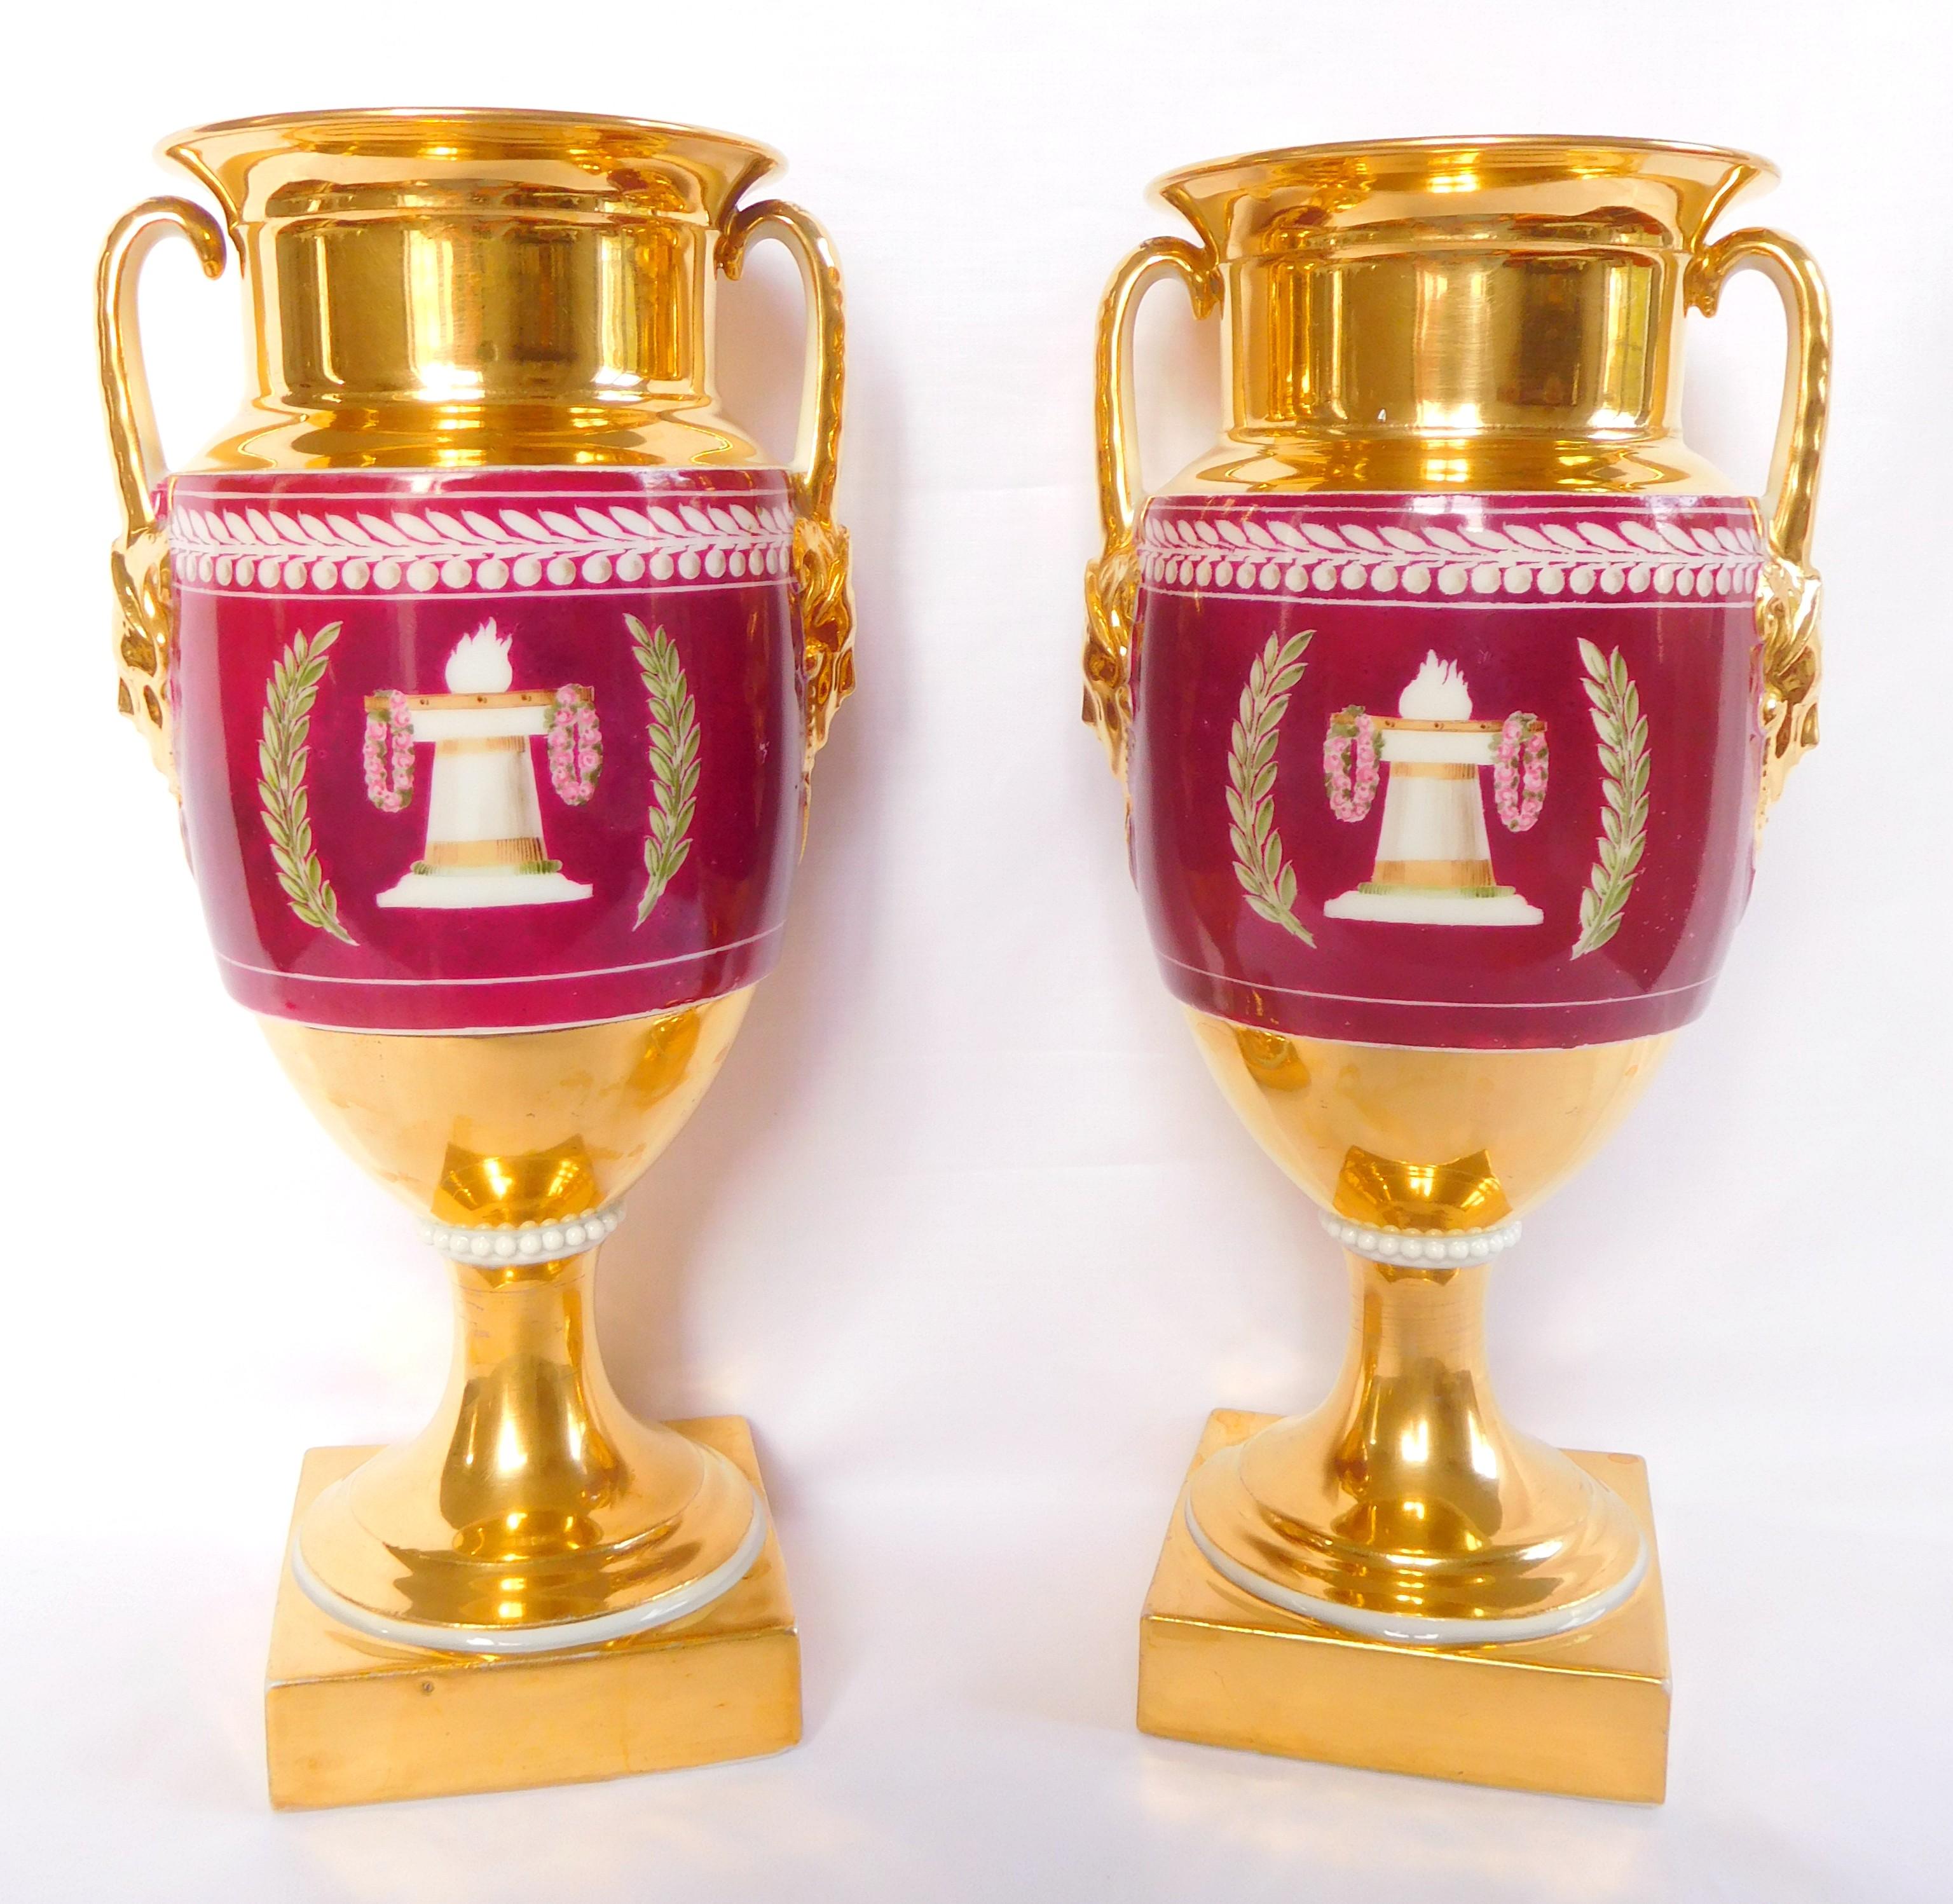 Pair of Paris porcelain vases, Restauration period, polychrome decoration on a burgundy-colored background. Early 19th century production circa 1830 - 1840.

On one side, the vases are decorated with 17th century / 18th century style portraits ; on